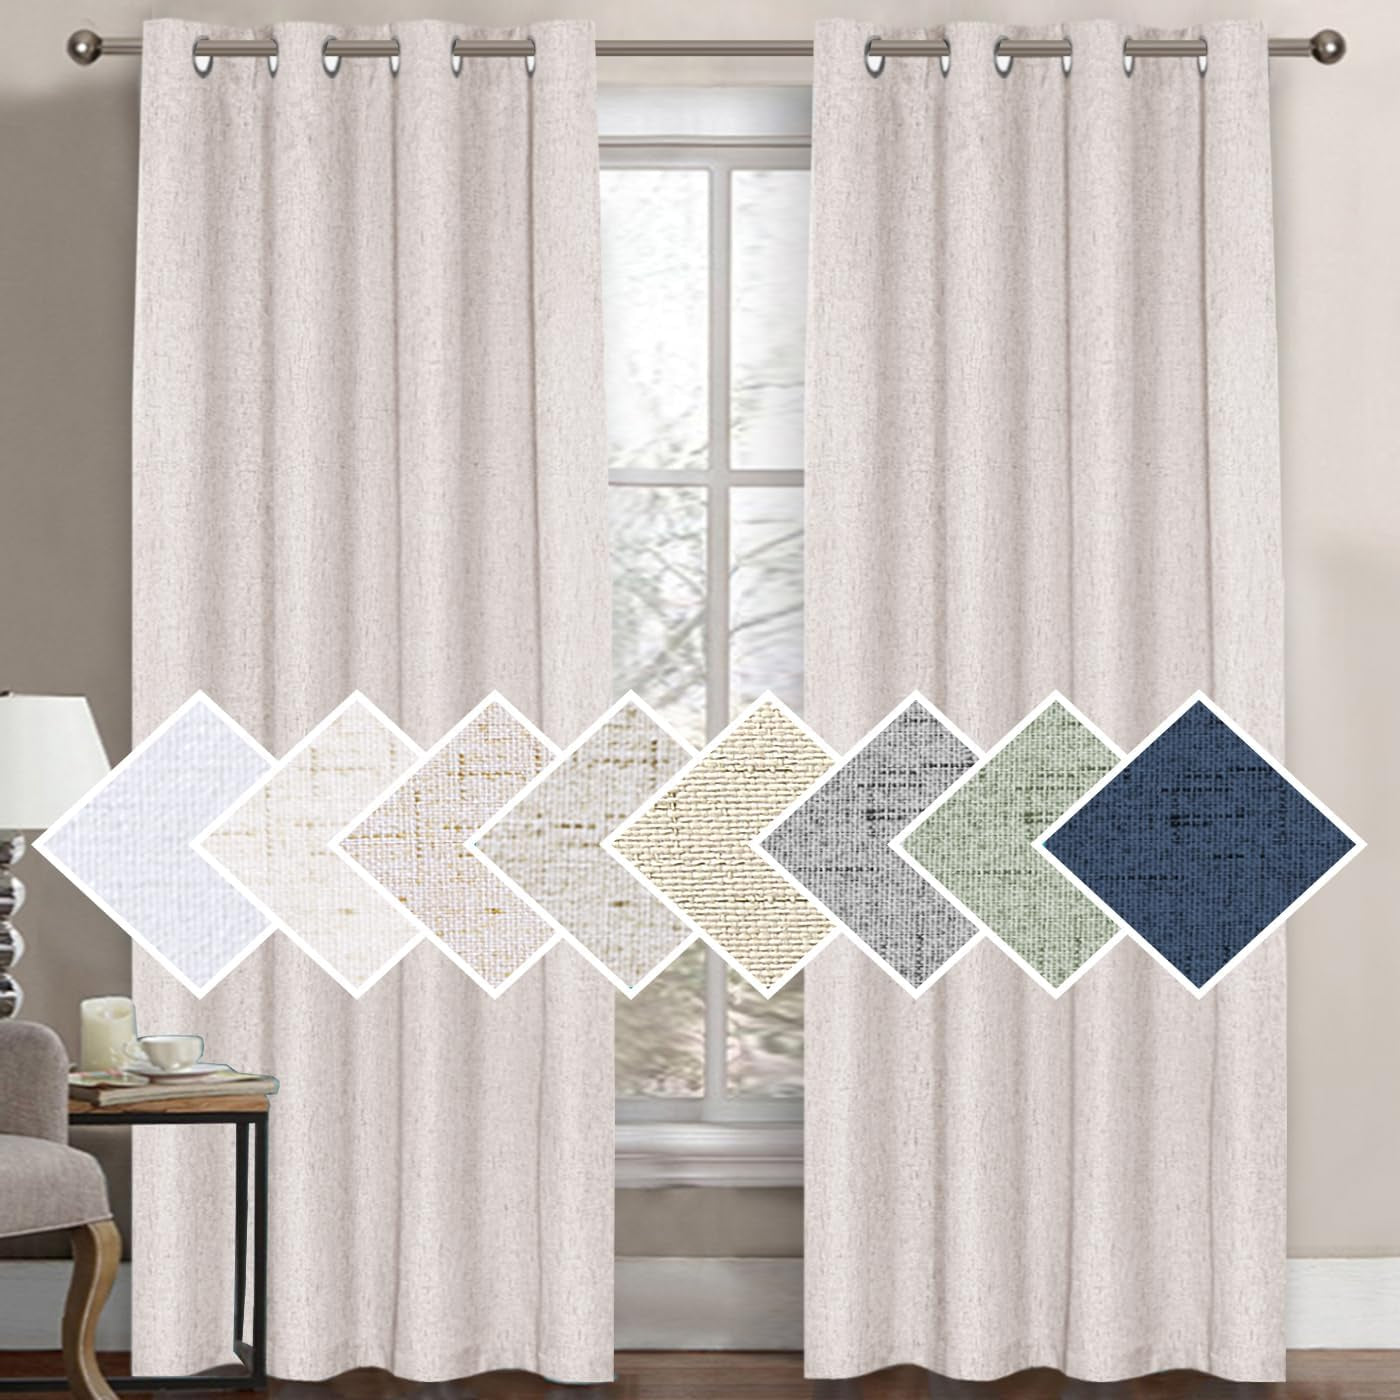 H.VERSAILTEX 100% Blackout Curtains for Bedroom Thermal Insulated Linen Textured Curtains Heat and Full Light Blocking Drapes Living Room Curtains 2 Panel Sets, 52X84 - Inch, Natural  H.VERSAILTEX Ivory 1 Panel - 52"W X 96"L 